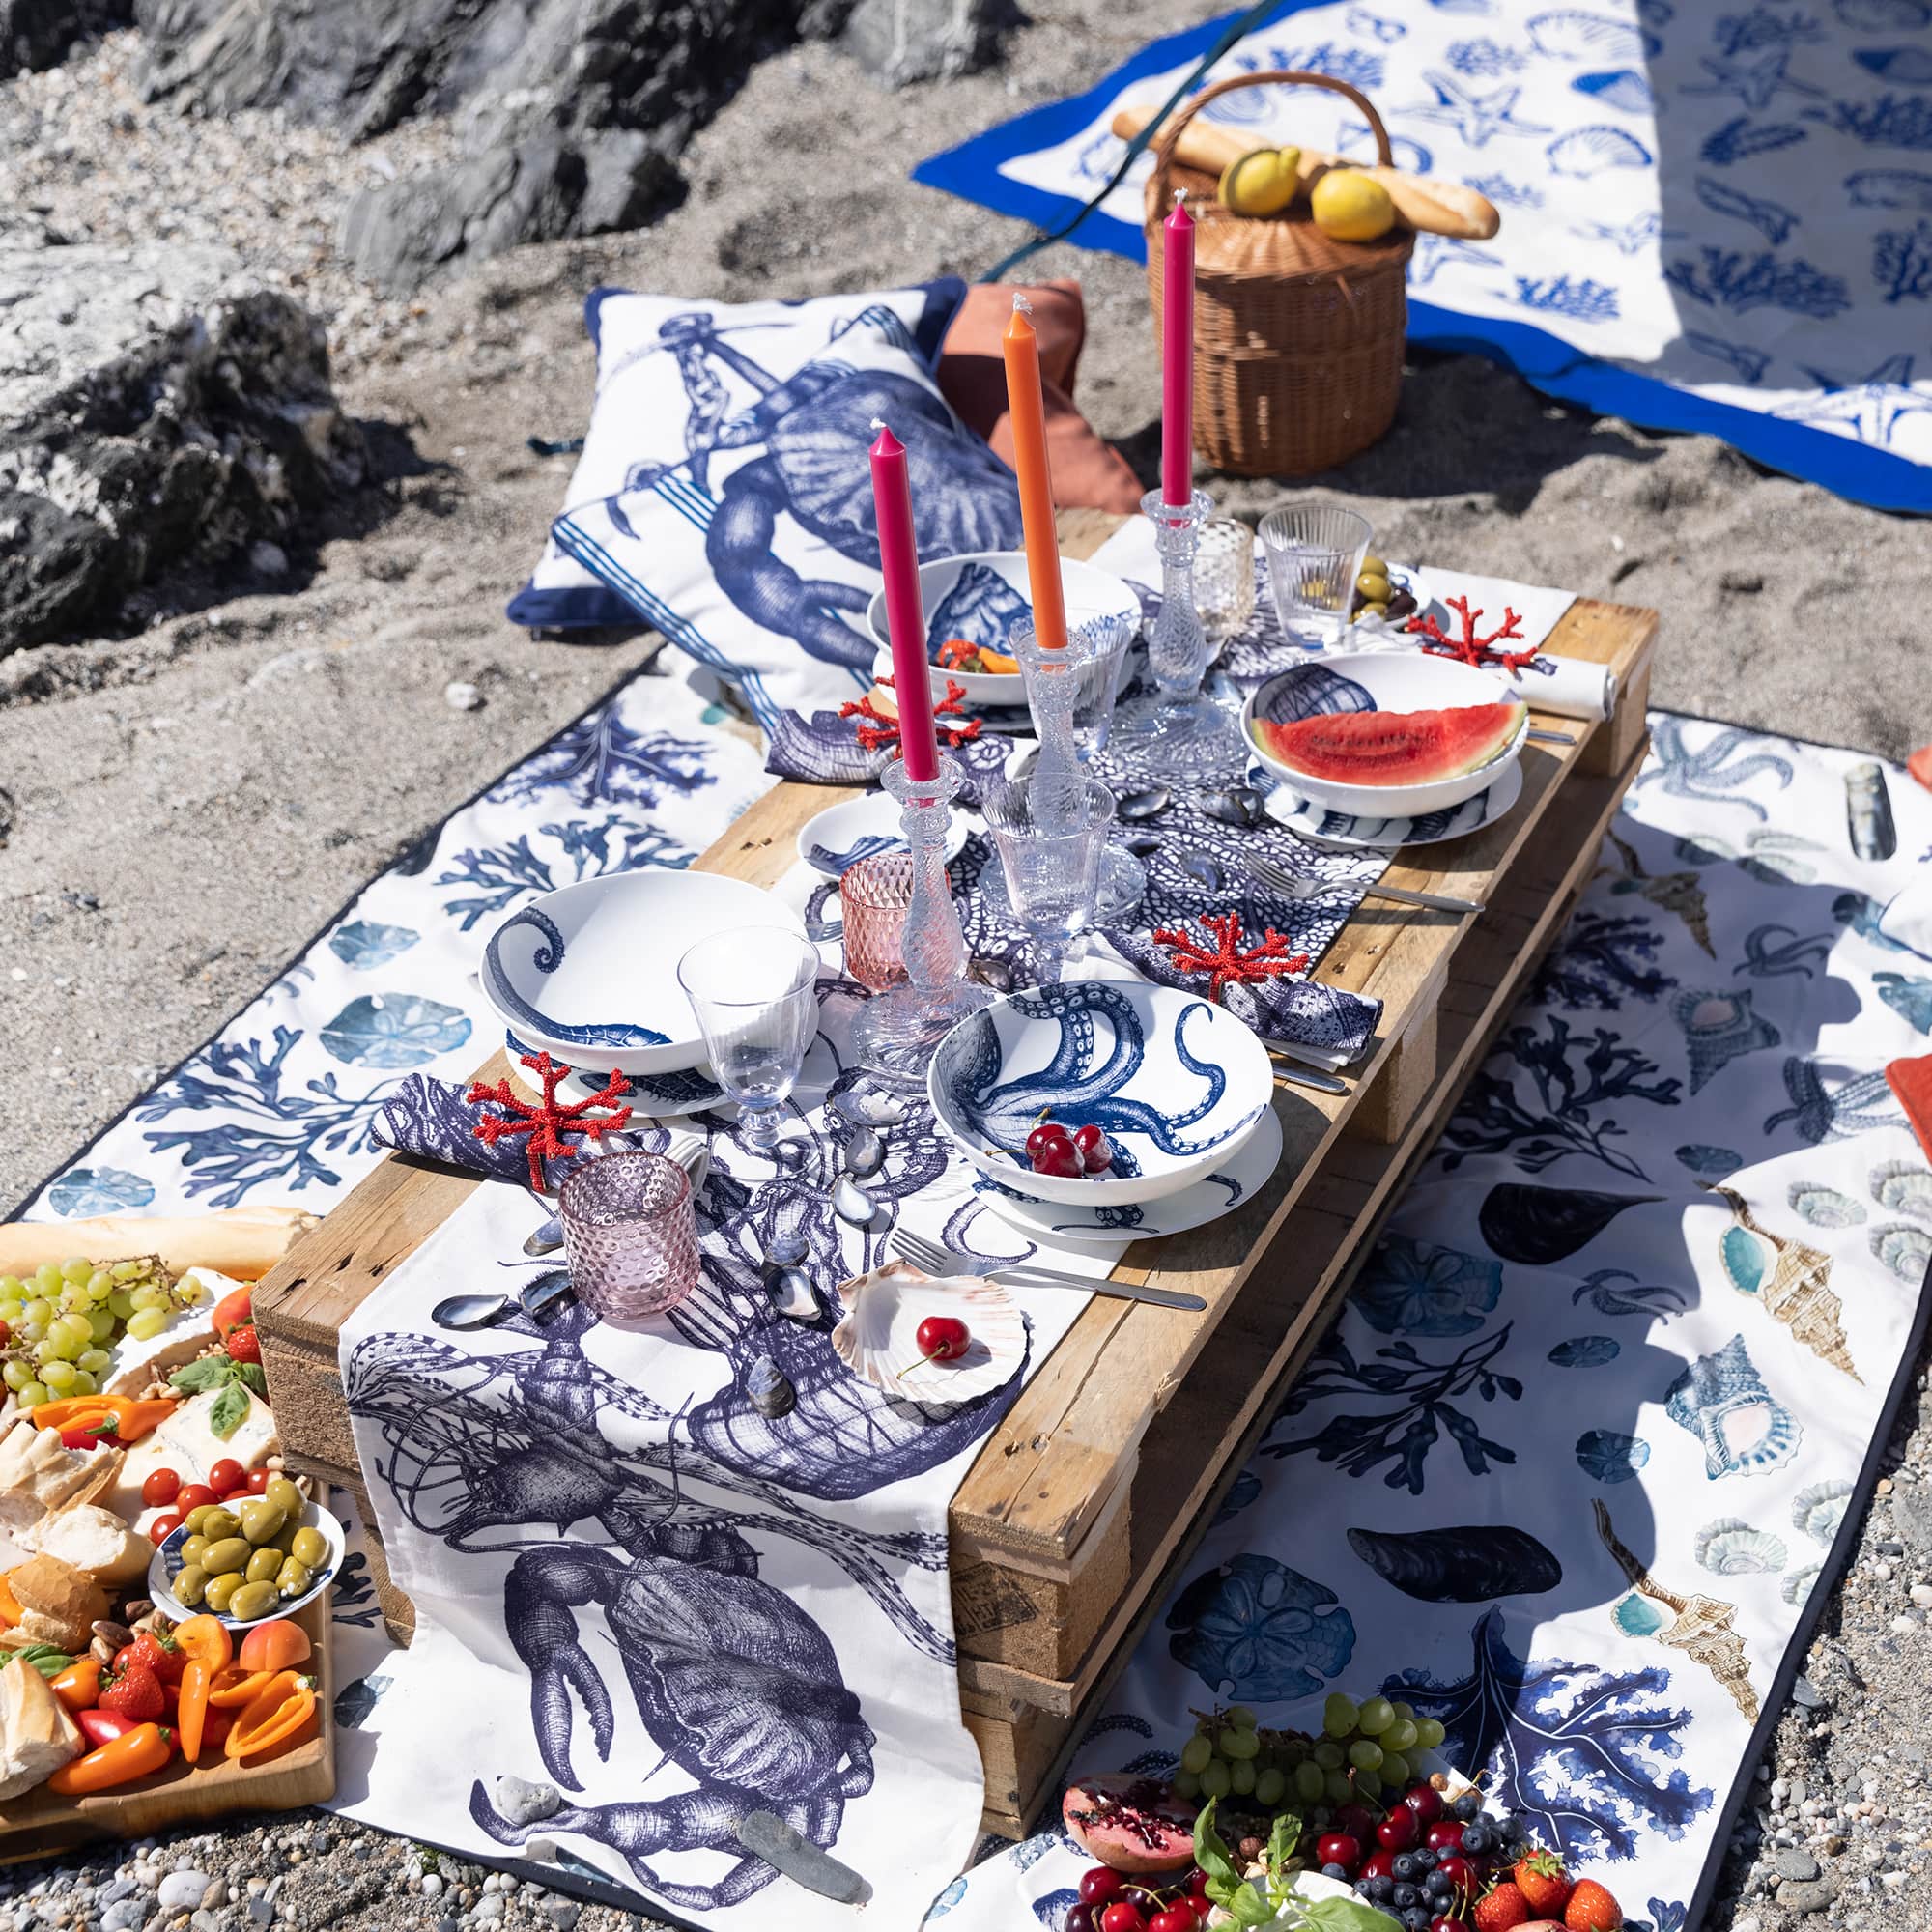 Cotton and Linen mix Sea Creature table runner displayed on a beach over a Picnic blanket.On the table runner are various Classic tableware with colourful foods in some of the bowls.In the background you can see another blanket and some sea creature cushions.On the table are various pieces of glassware and candles catching the sunlight